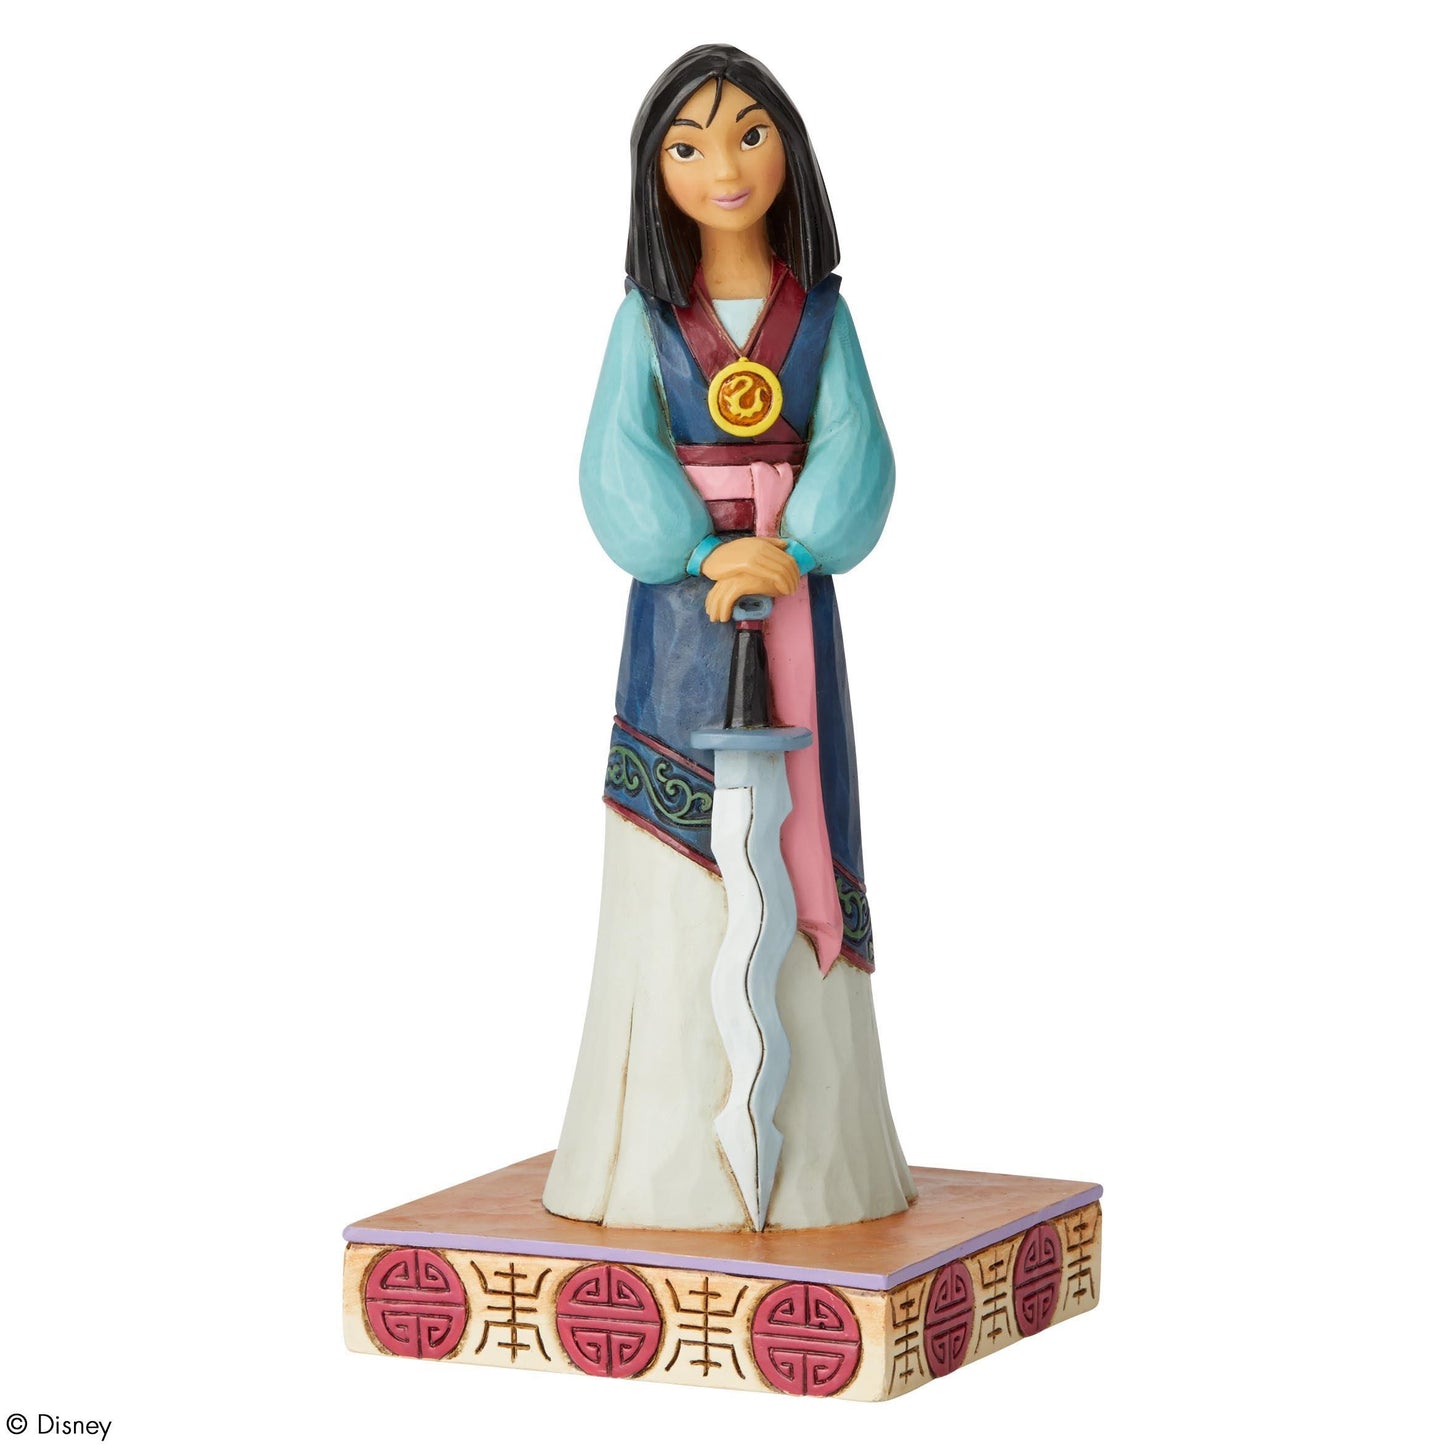 Winsome Warrior (Mulan Princess Passion Figurine) (Disney Traditions by Jim Shore) - Gallery Gifts Online 